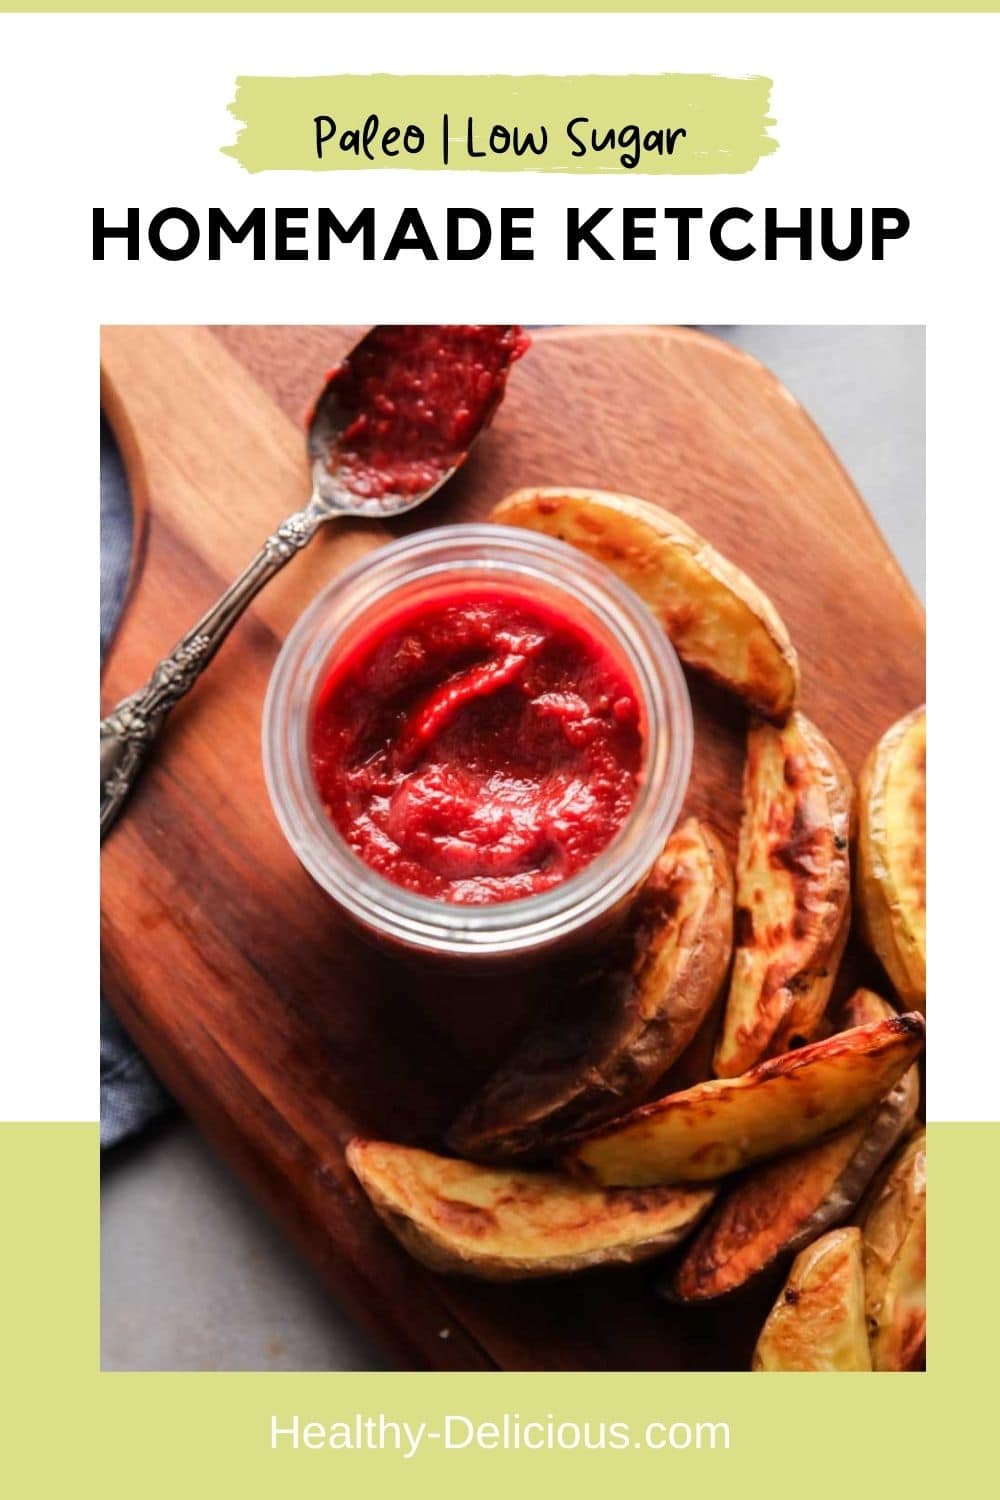 Easy homemade ketchup without any corn syrup! This paleo ketchup recipe is sweetened with honey and balsamic vinegar for the classic flavor you know and love without all of the sugar. via @HealthyDelish